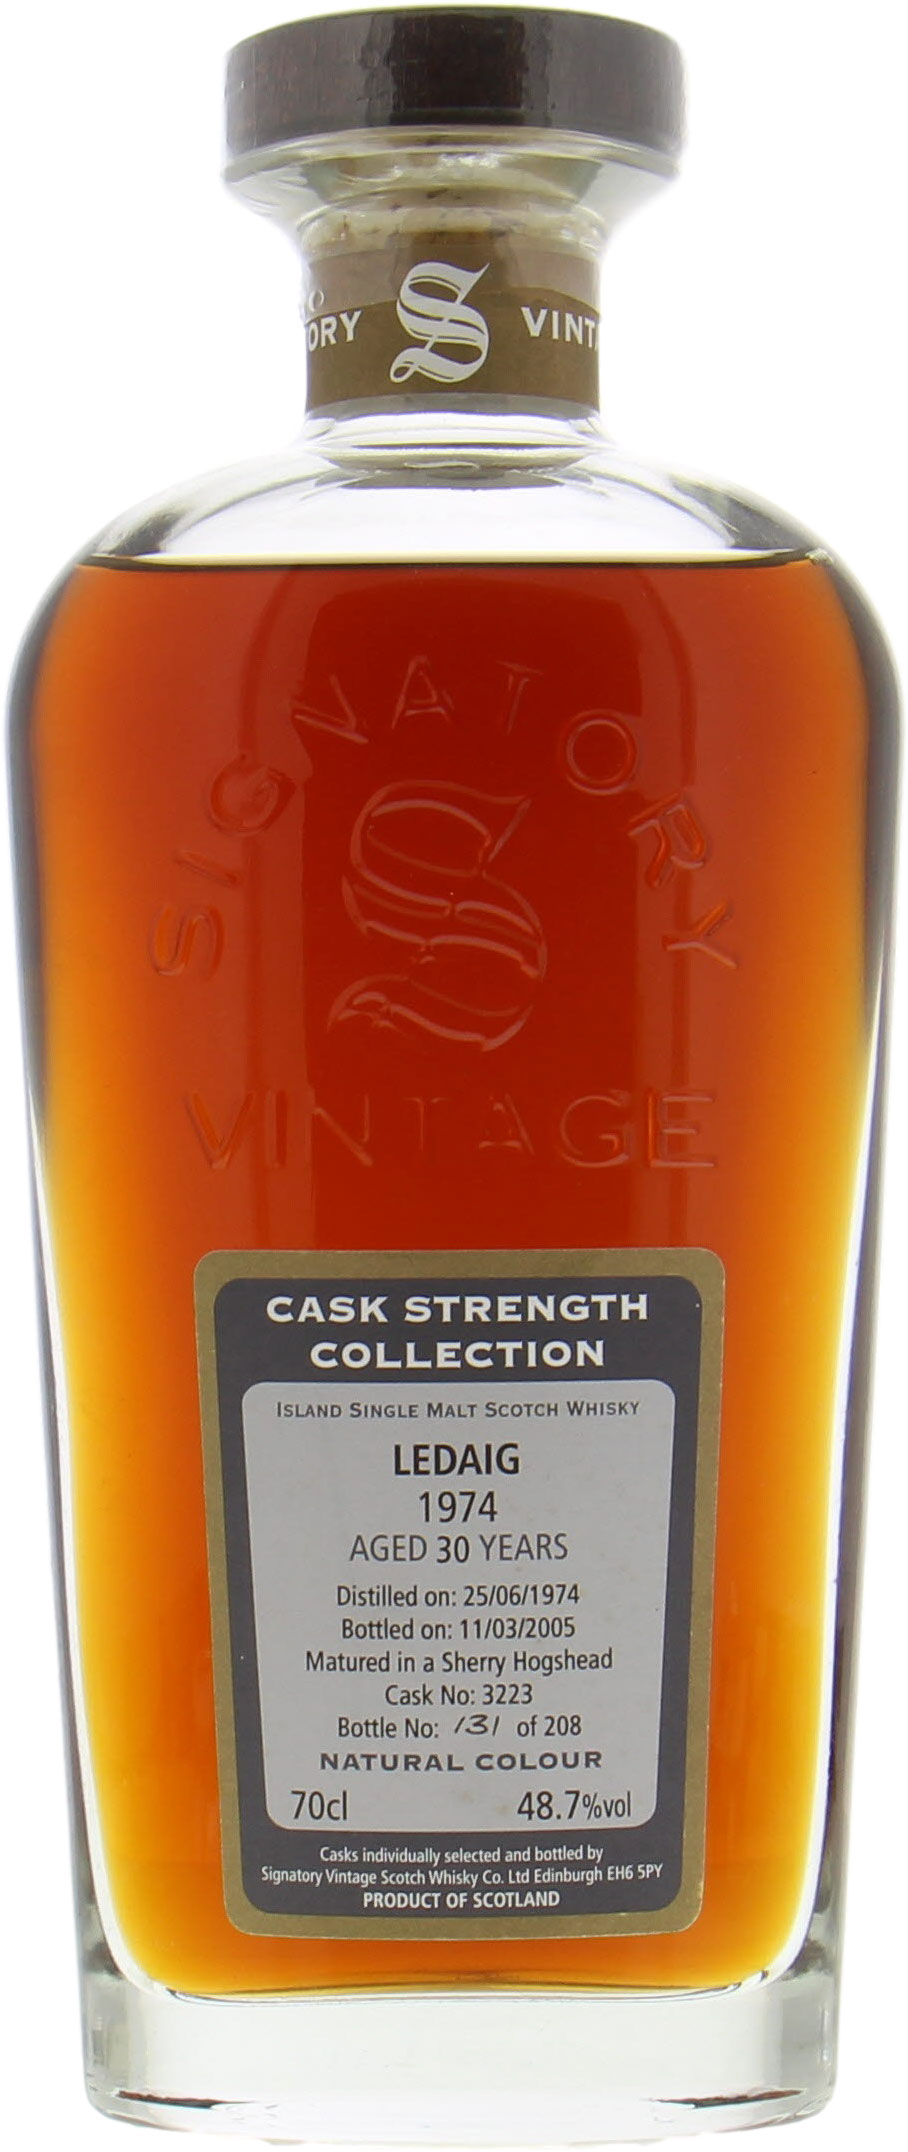 Ledaig - 30 Years Old Signatory Vintage Cask 3223 48.7% 1974 No Original Container Included